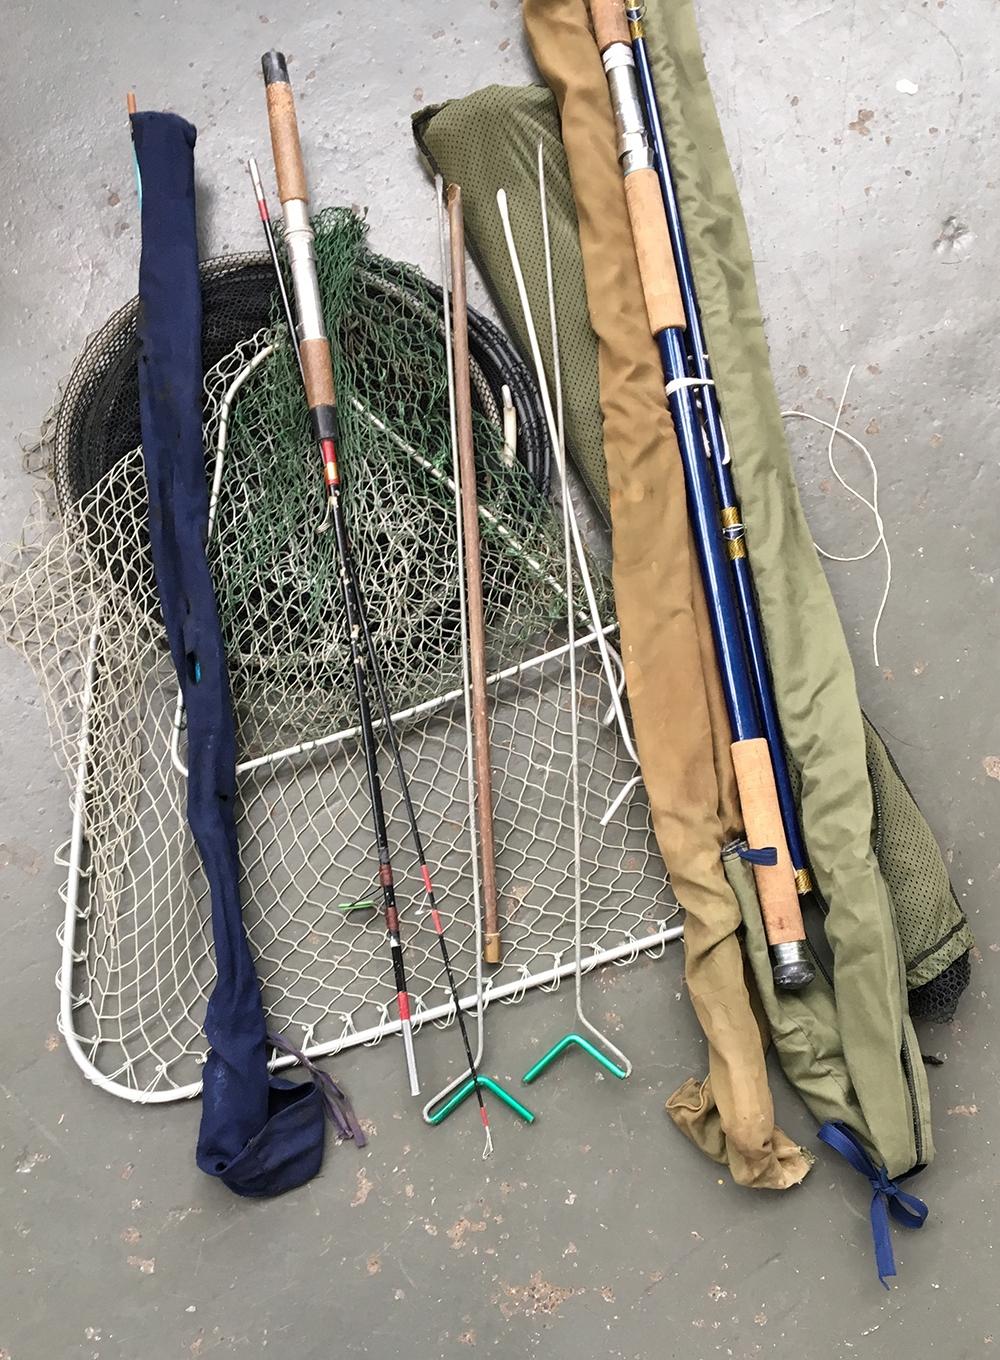 Three vintage coarse fishing landing nets, a keep net, bank sticks and rod rests together with two